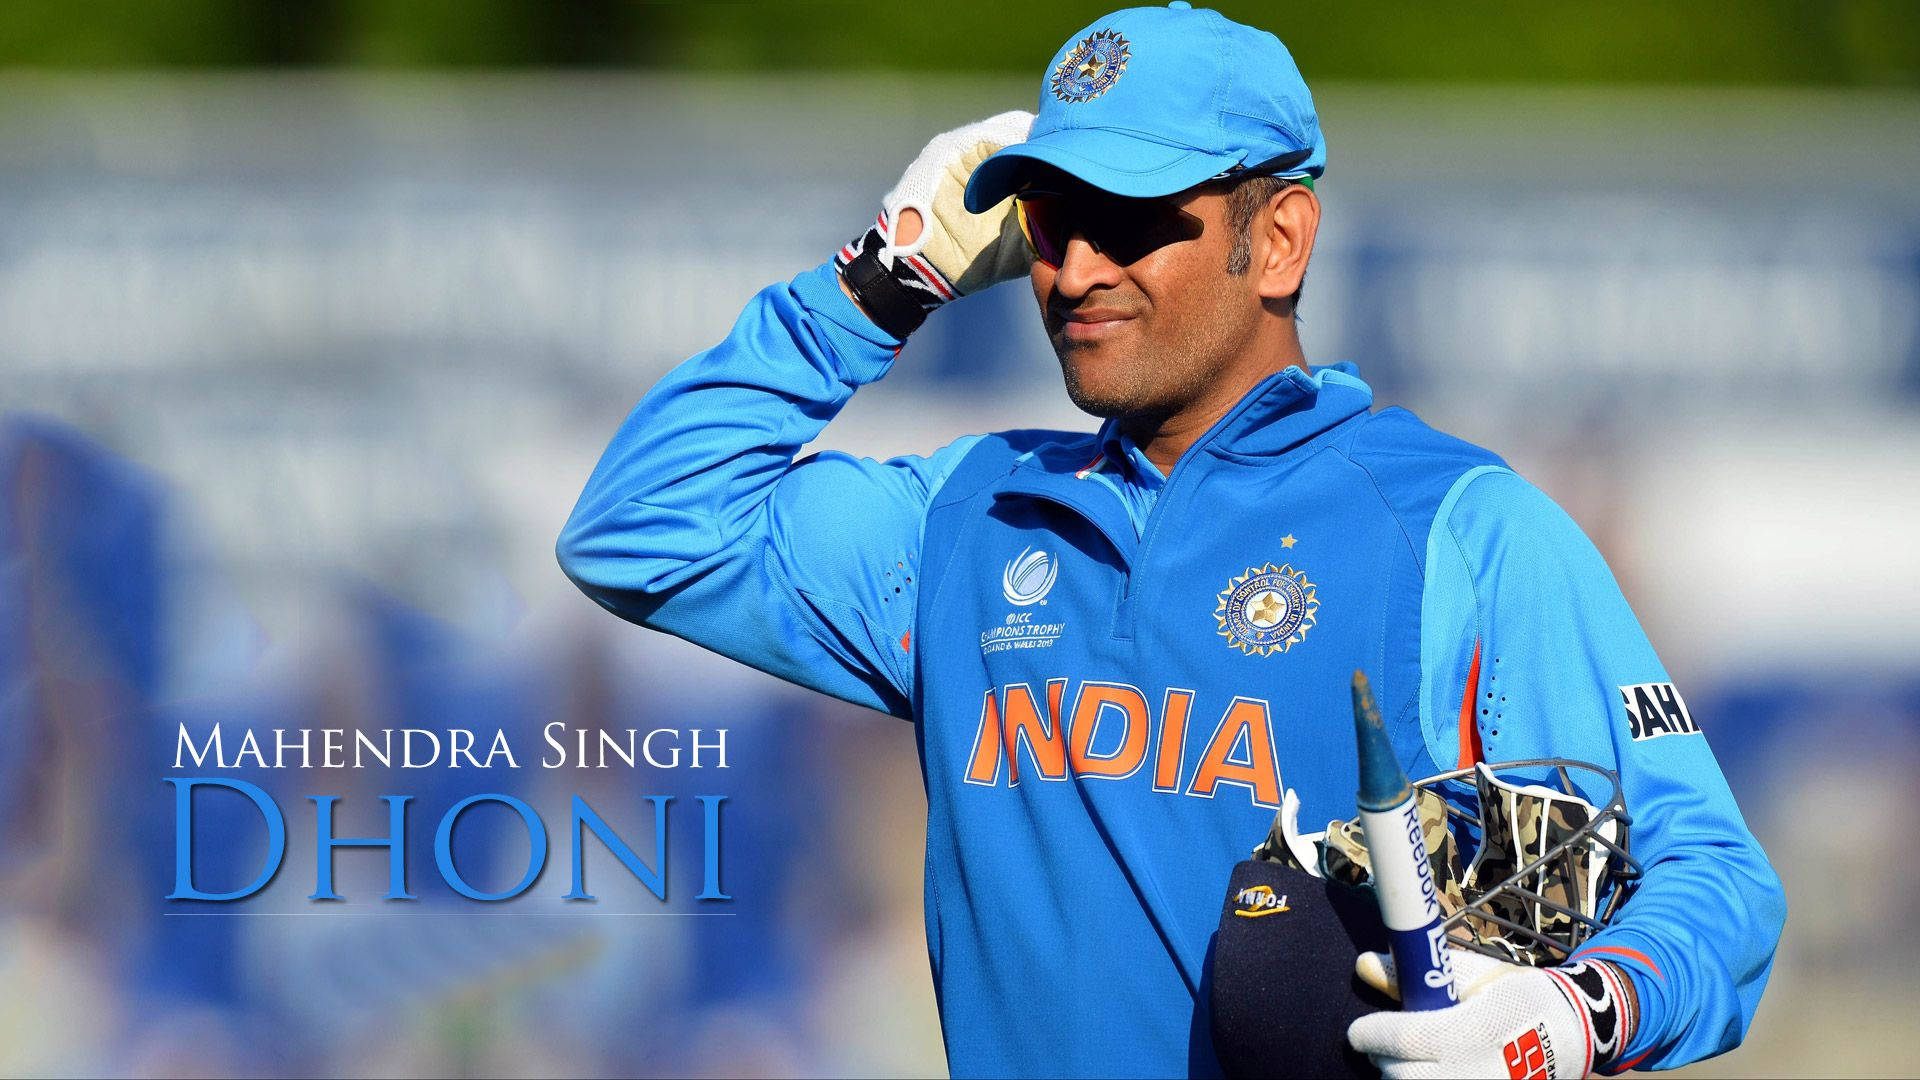 Ms Dhoni Hd Captioned Background